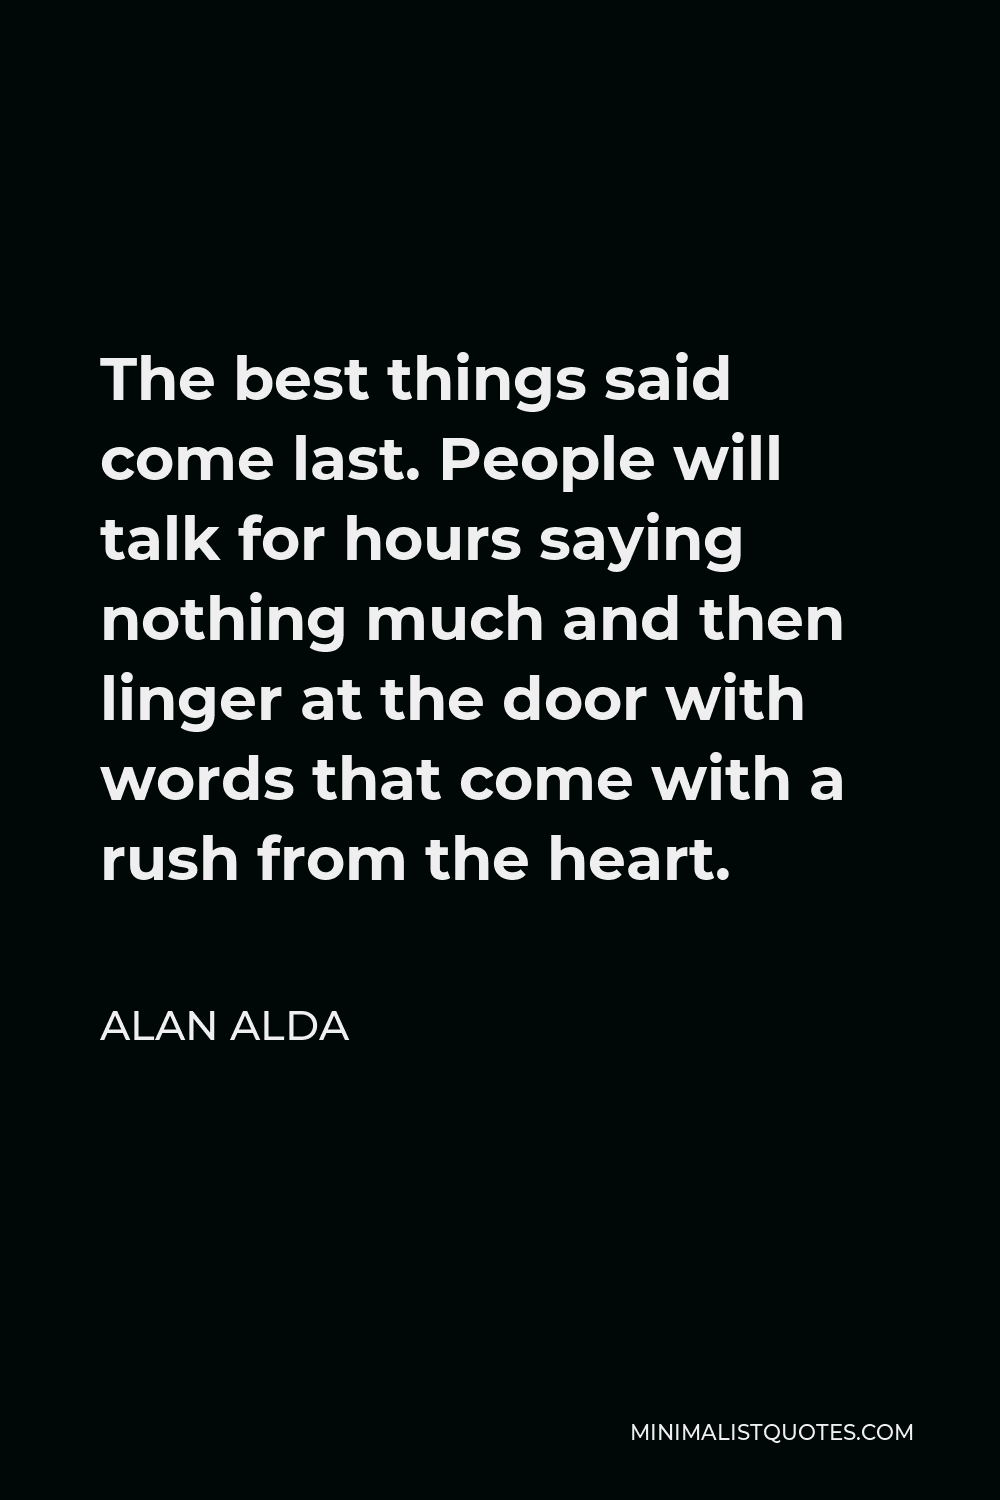 Alan Alda Quote - The best things said come last. People will talk for hours saying nothing much and then linger at the door with words that come with a rush from the heart.